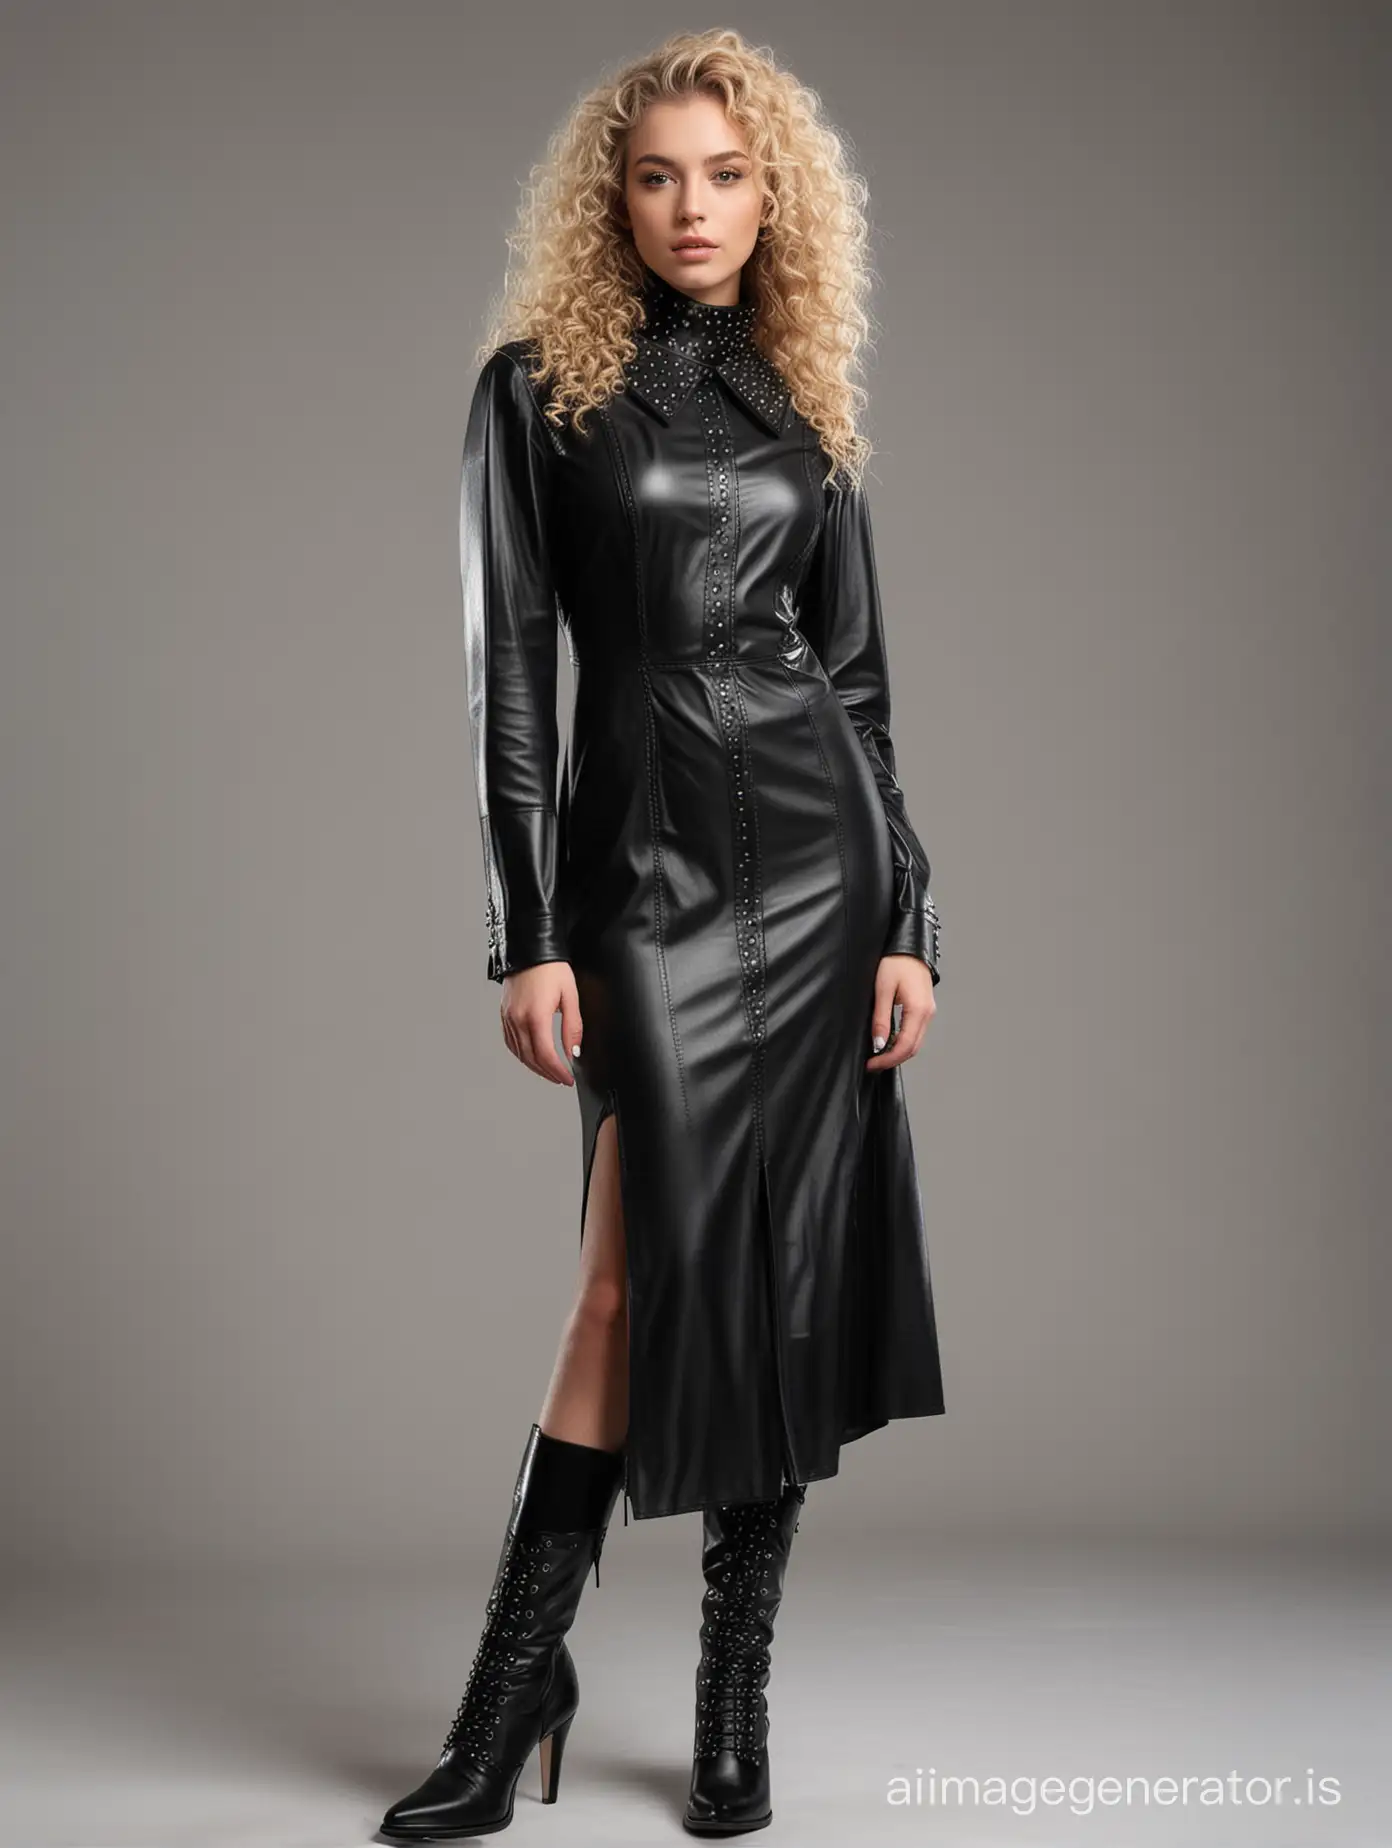 Blond-CurlyHaired-Fashion-Model-in-Elegant-Plexiglass-Dress-and-Spiked-Collar